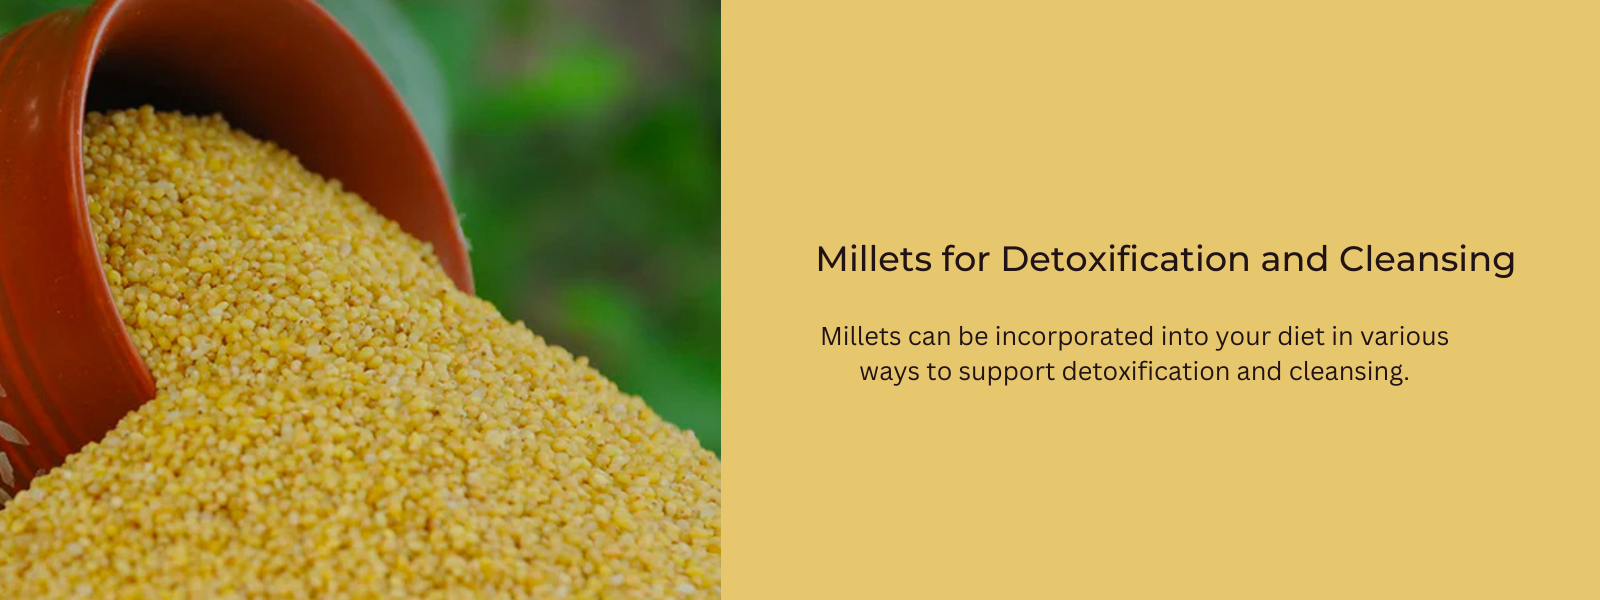 Millets for Detoxification and Cleansing